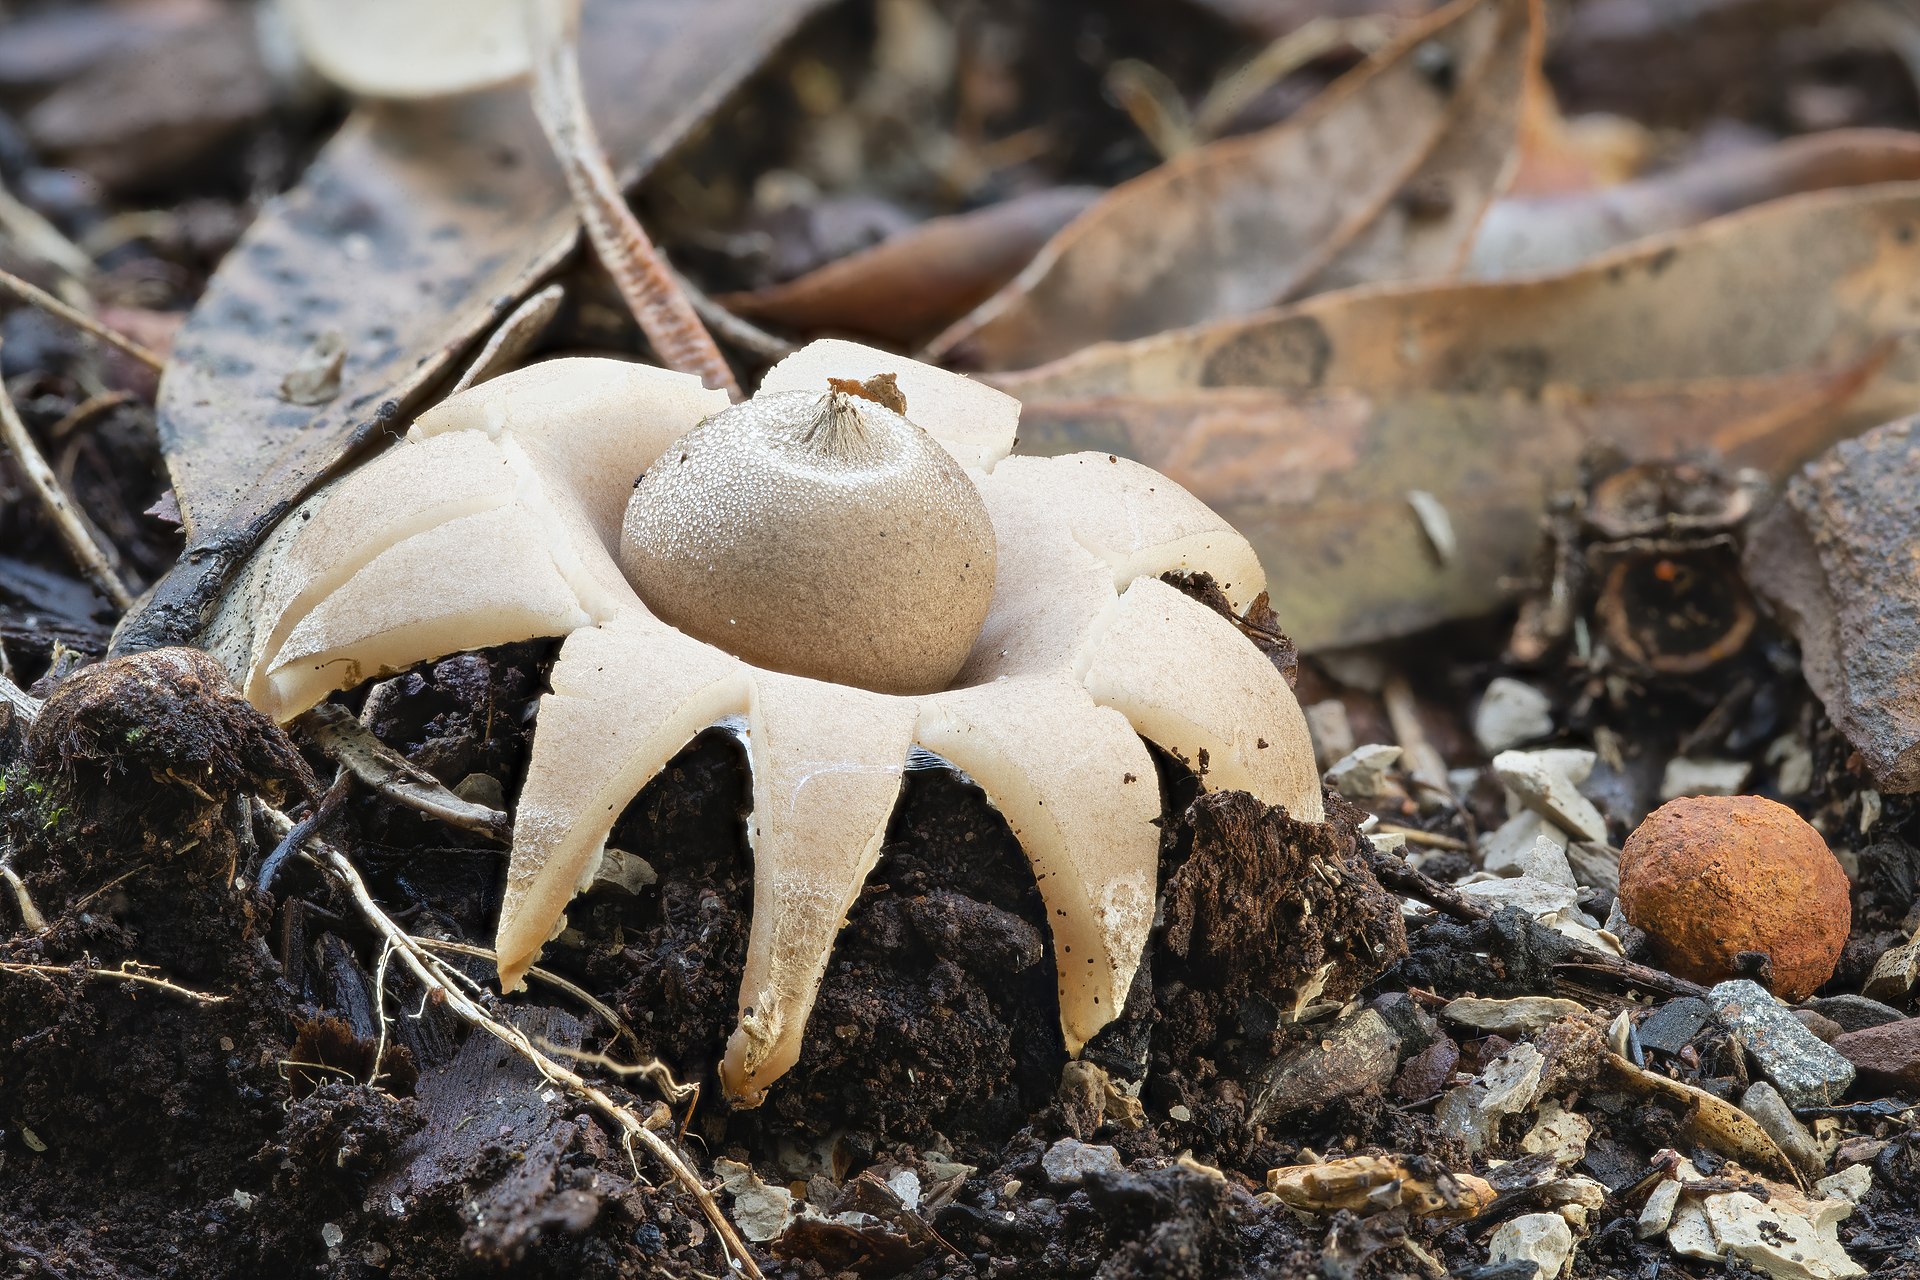 CYCLE OF NATURE: The incredible earthstar